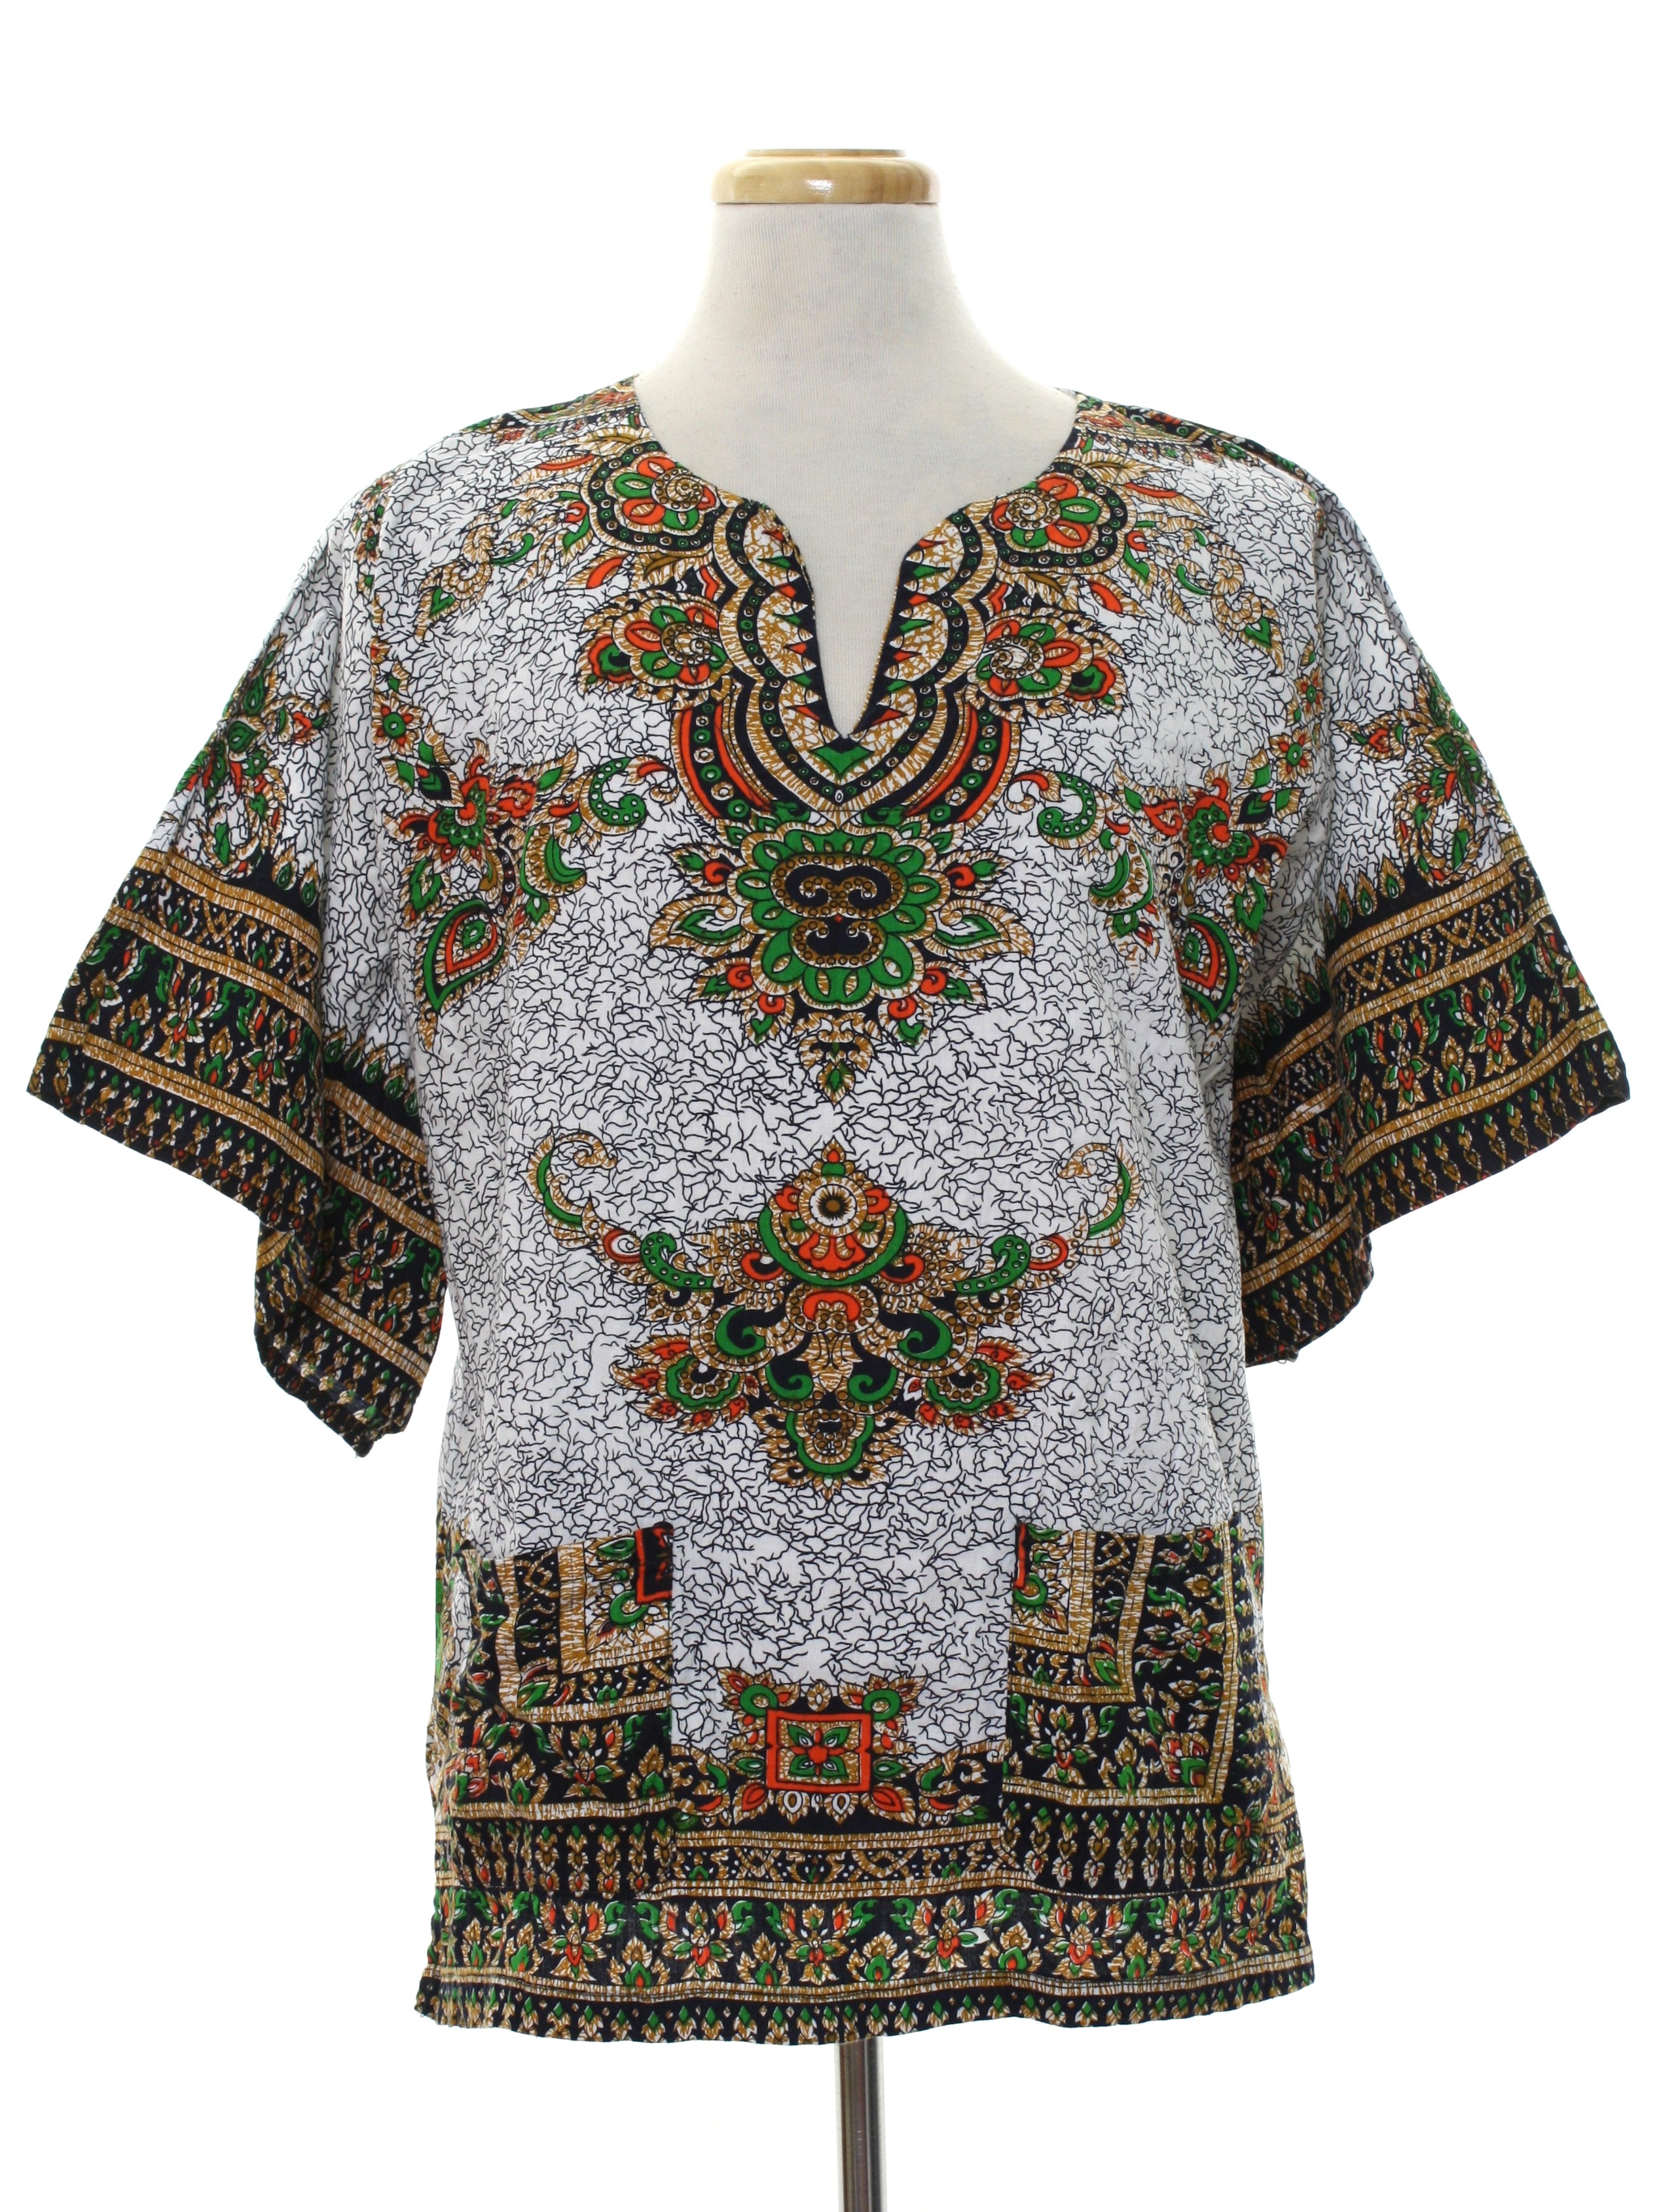 Retro 1970's Hippie Shirt (Made in Thailand) : 70s style (made more ...